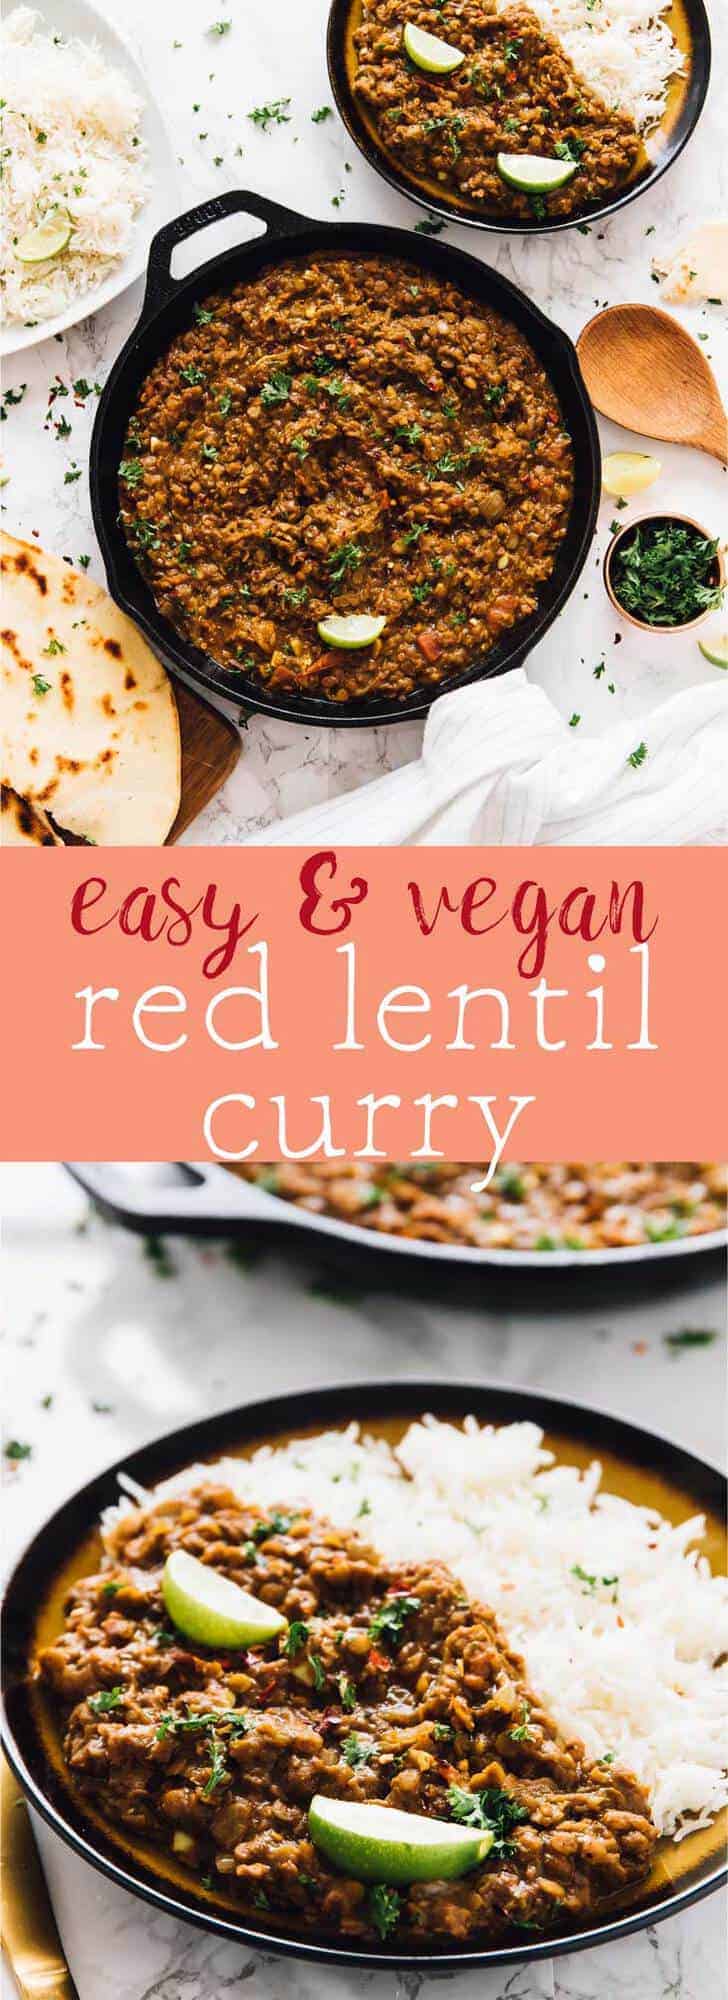 This Red Lentil Curry is SUCH a delicious curry recipe made in under an hour! It's made easily in one pot, is vegan and freezes so well! via https://jessicainthekitchen.com 